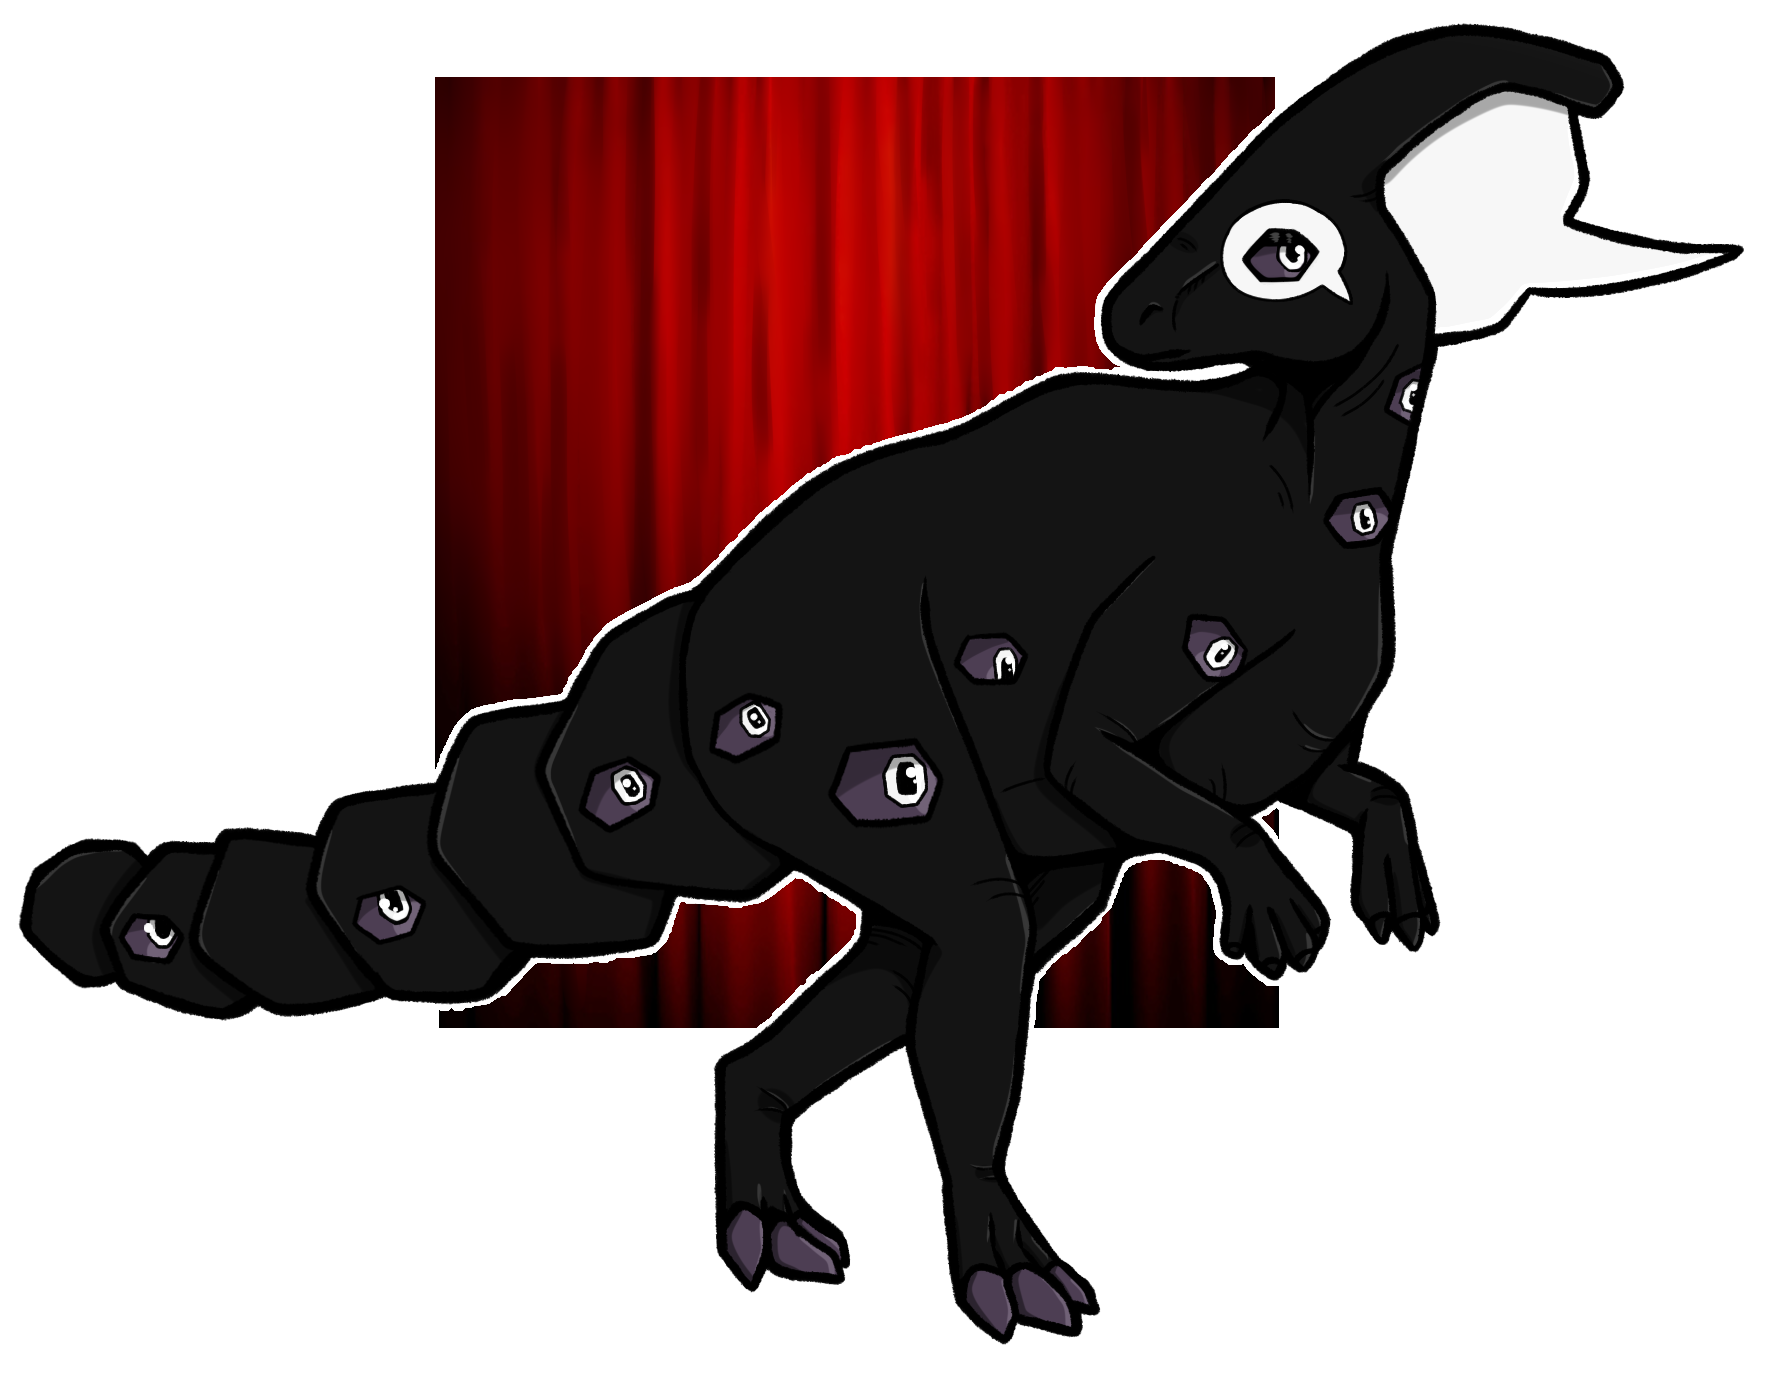 [Gift] Oh Puppeteer